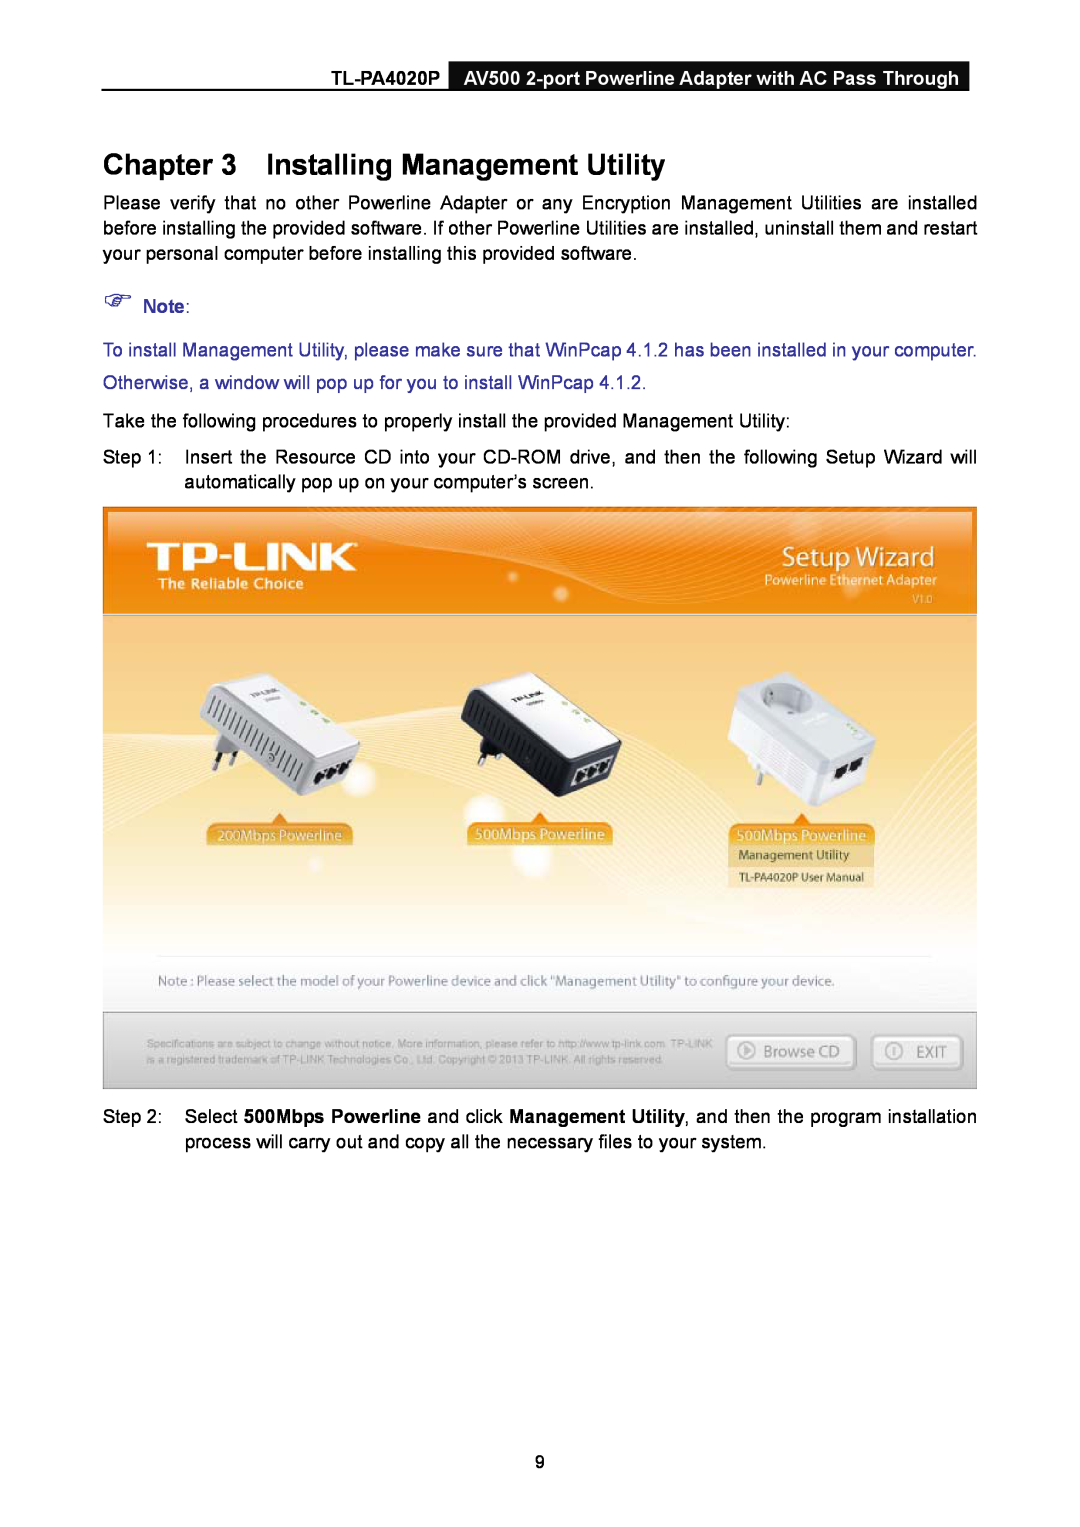 TP-Link manual Installing Management Utility, TL-PA4020P AV500 2-port Powerline Adapter with AC Pass Through 